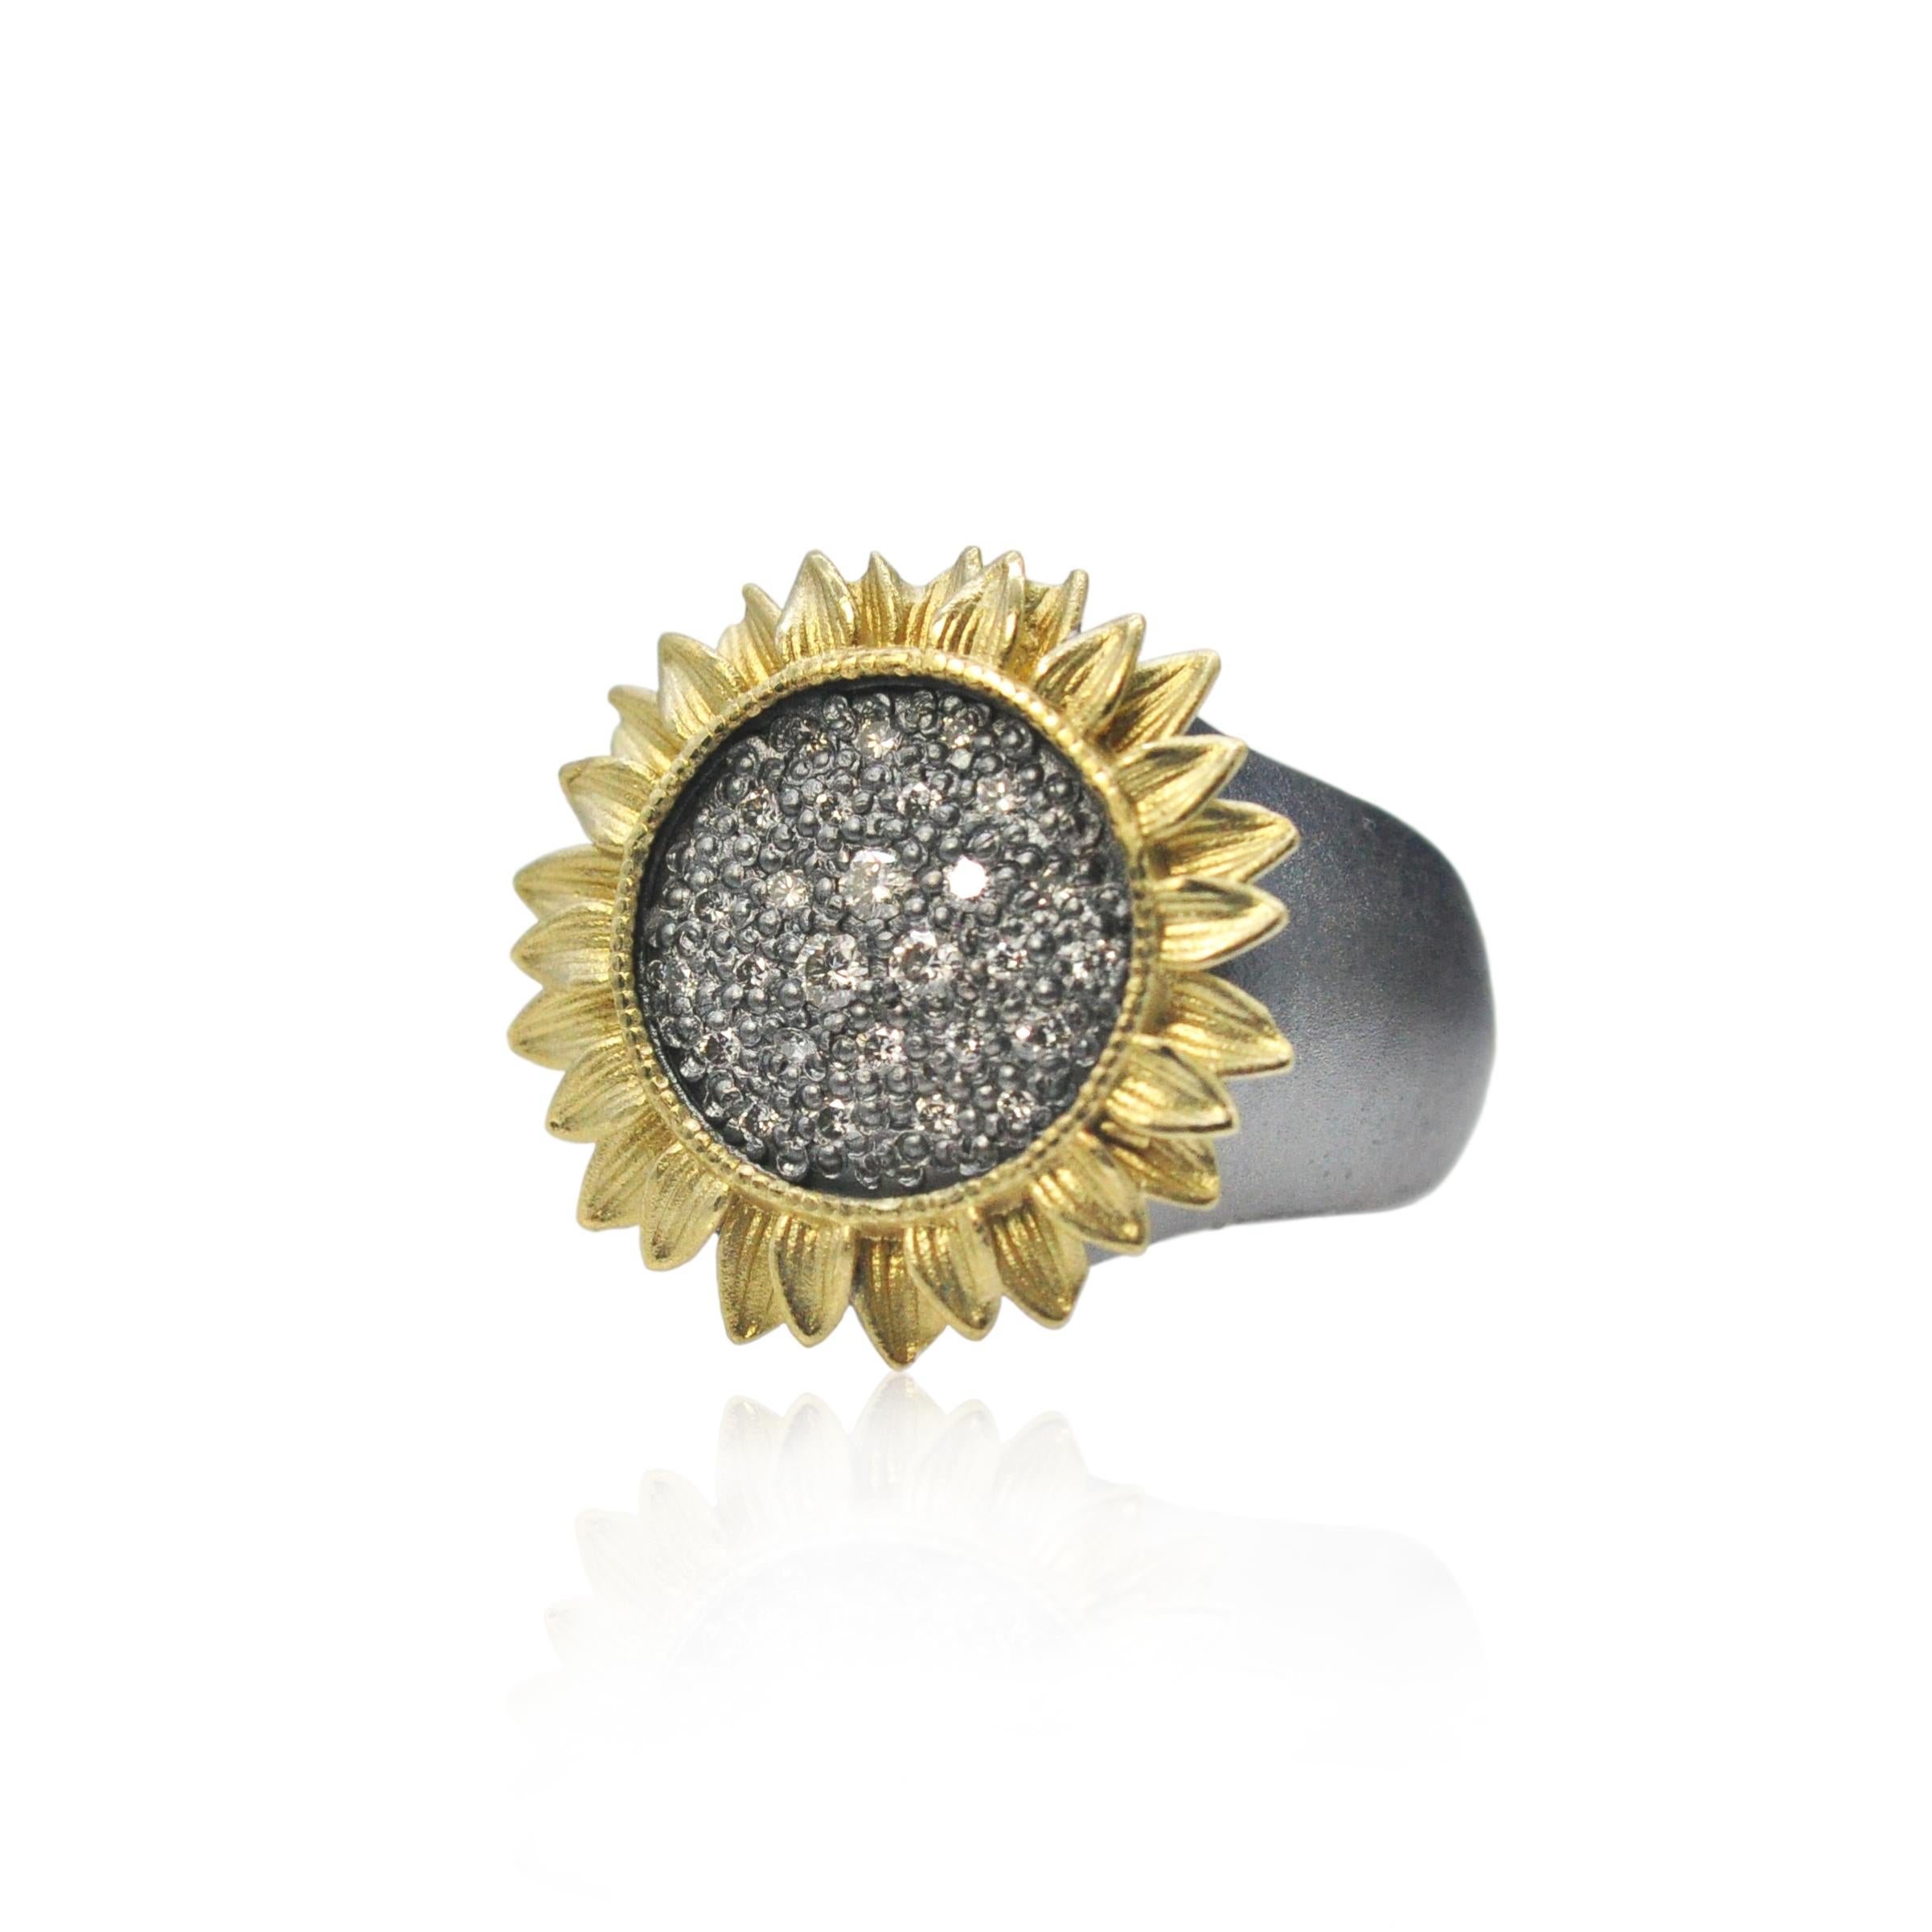 For Sale:  Sunflower Ring with Pave Set Diamonds in Oxidized Silver, Large 5